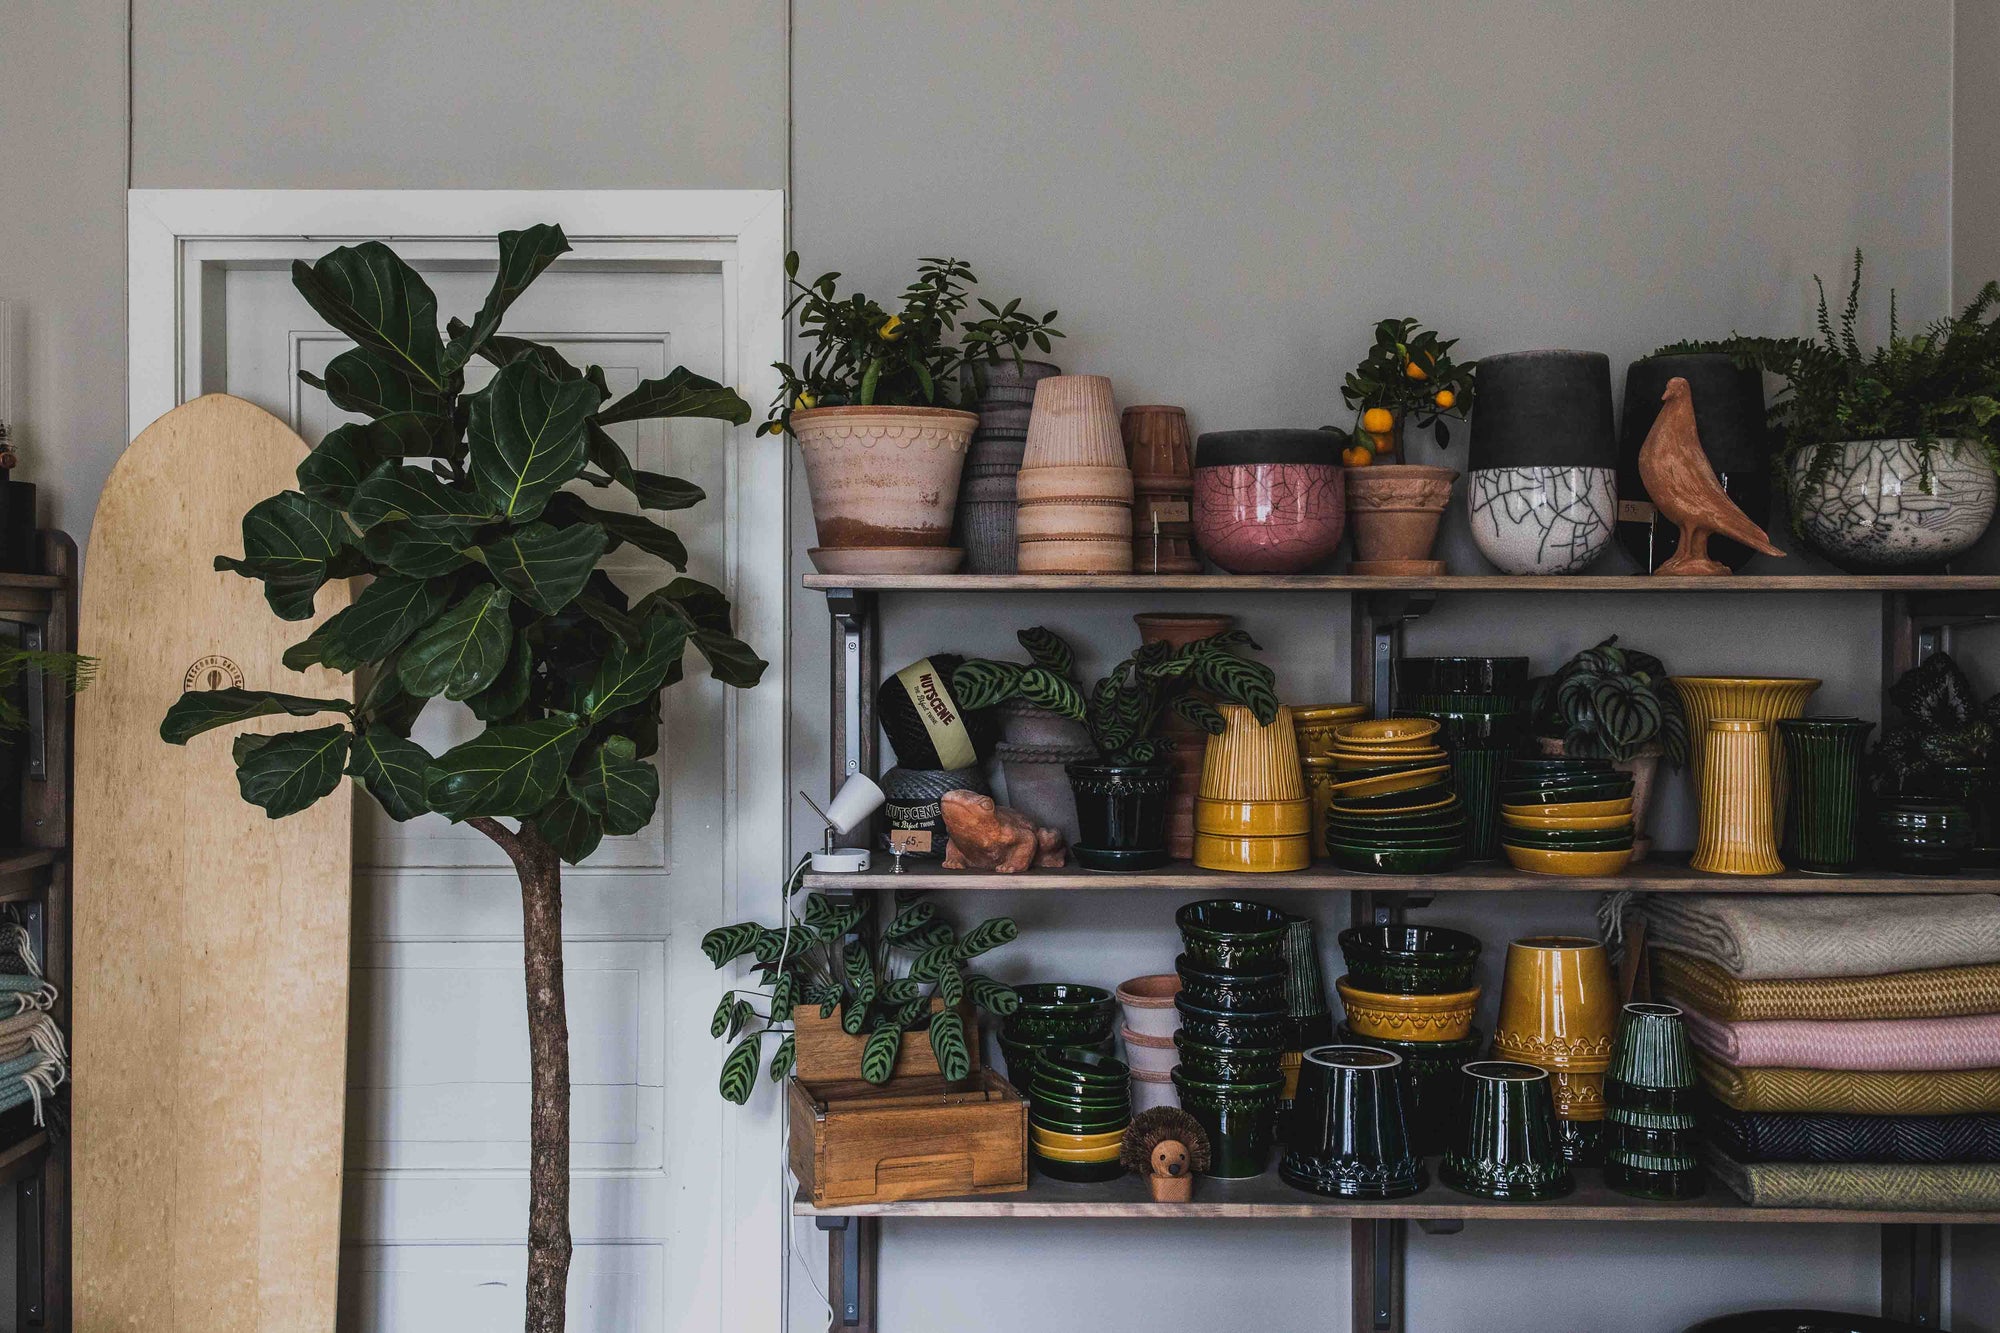 All About Pots - How to Choose the Perfect Pot